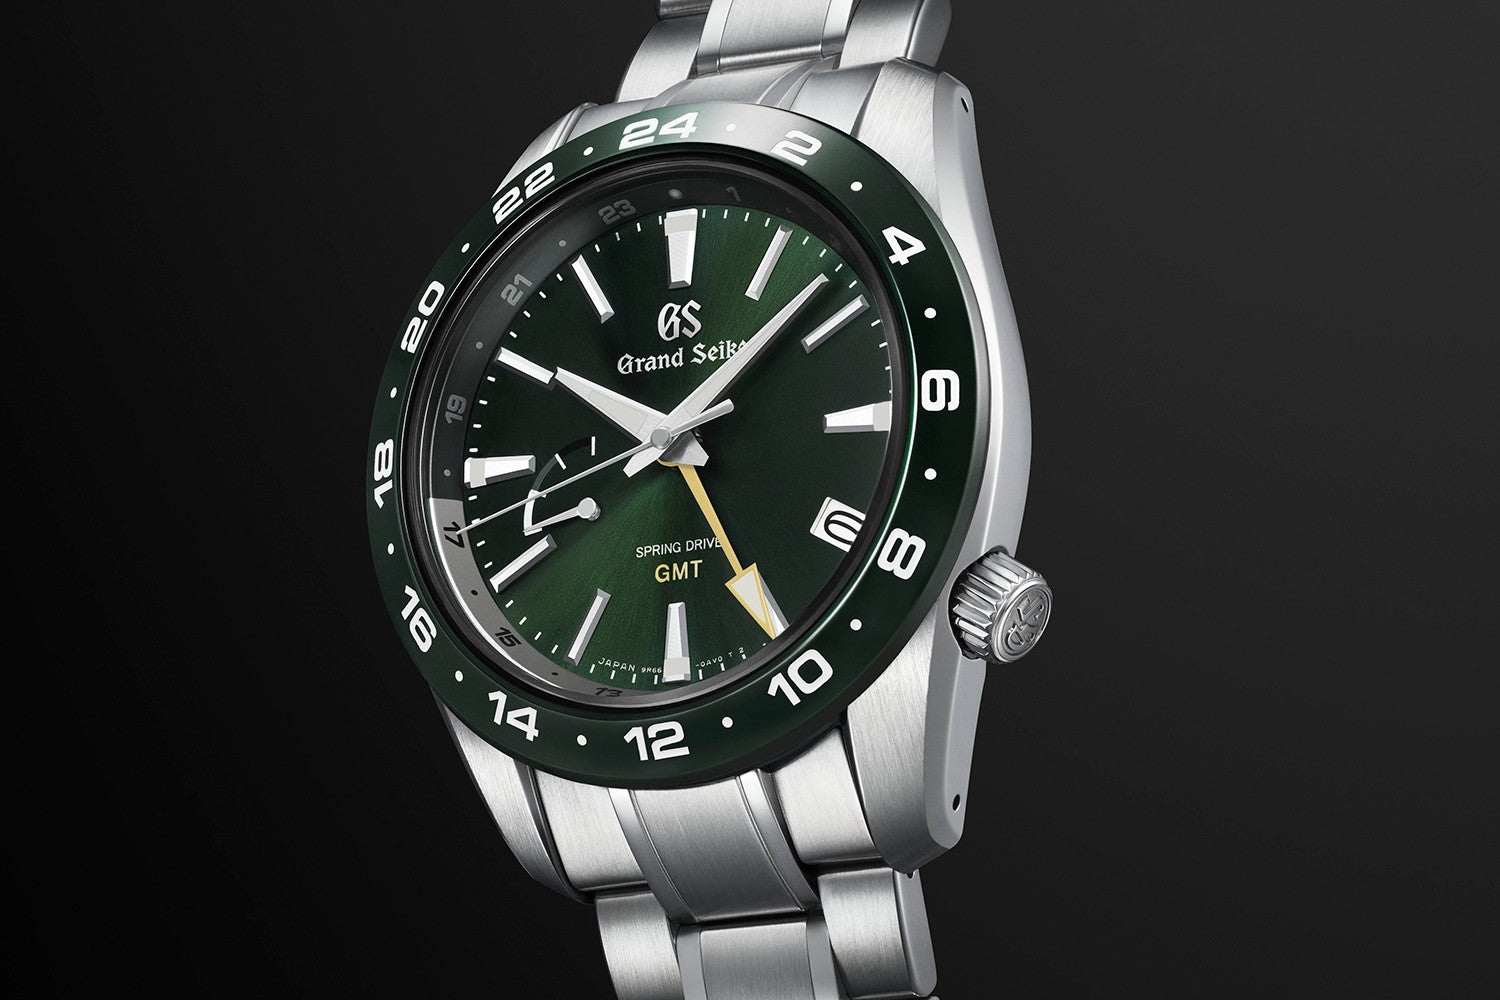 SBGE257G - SPRING DRIVE GMT WITH CERAMIC BEZEL